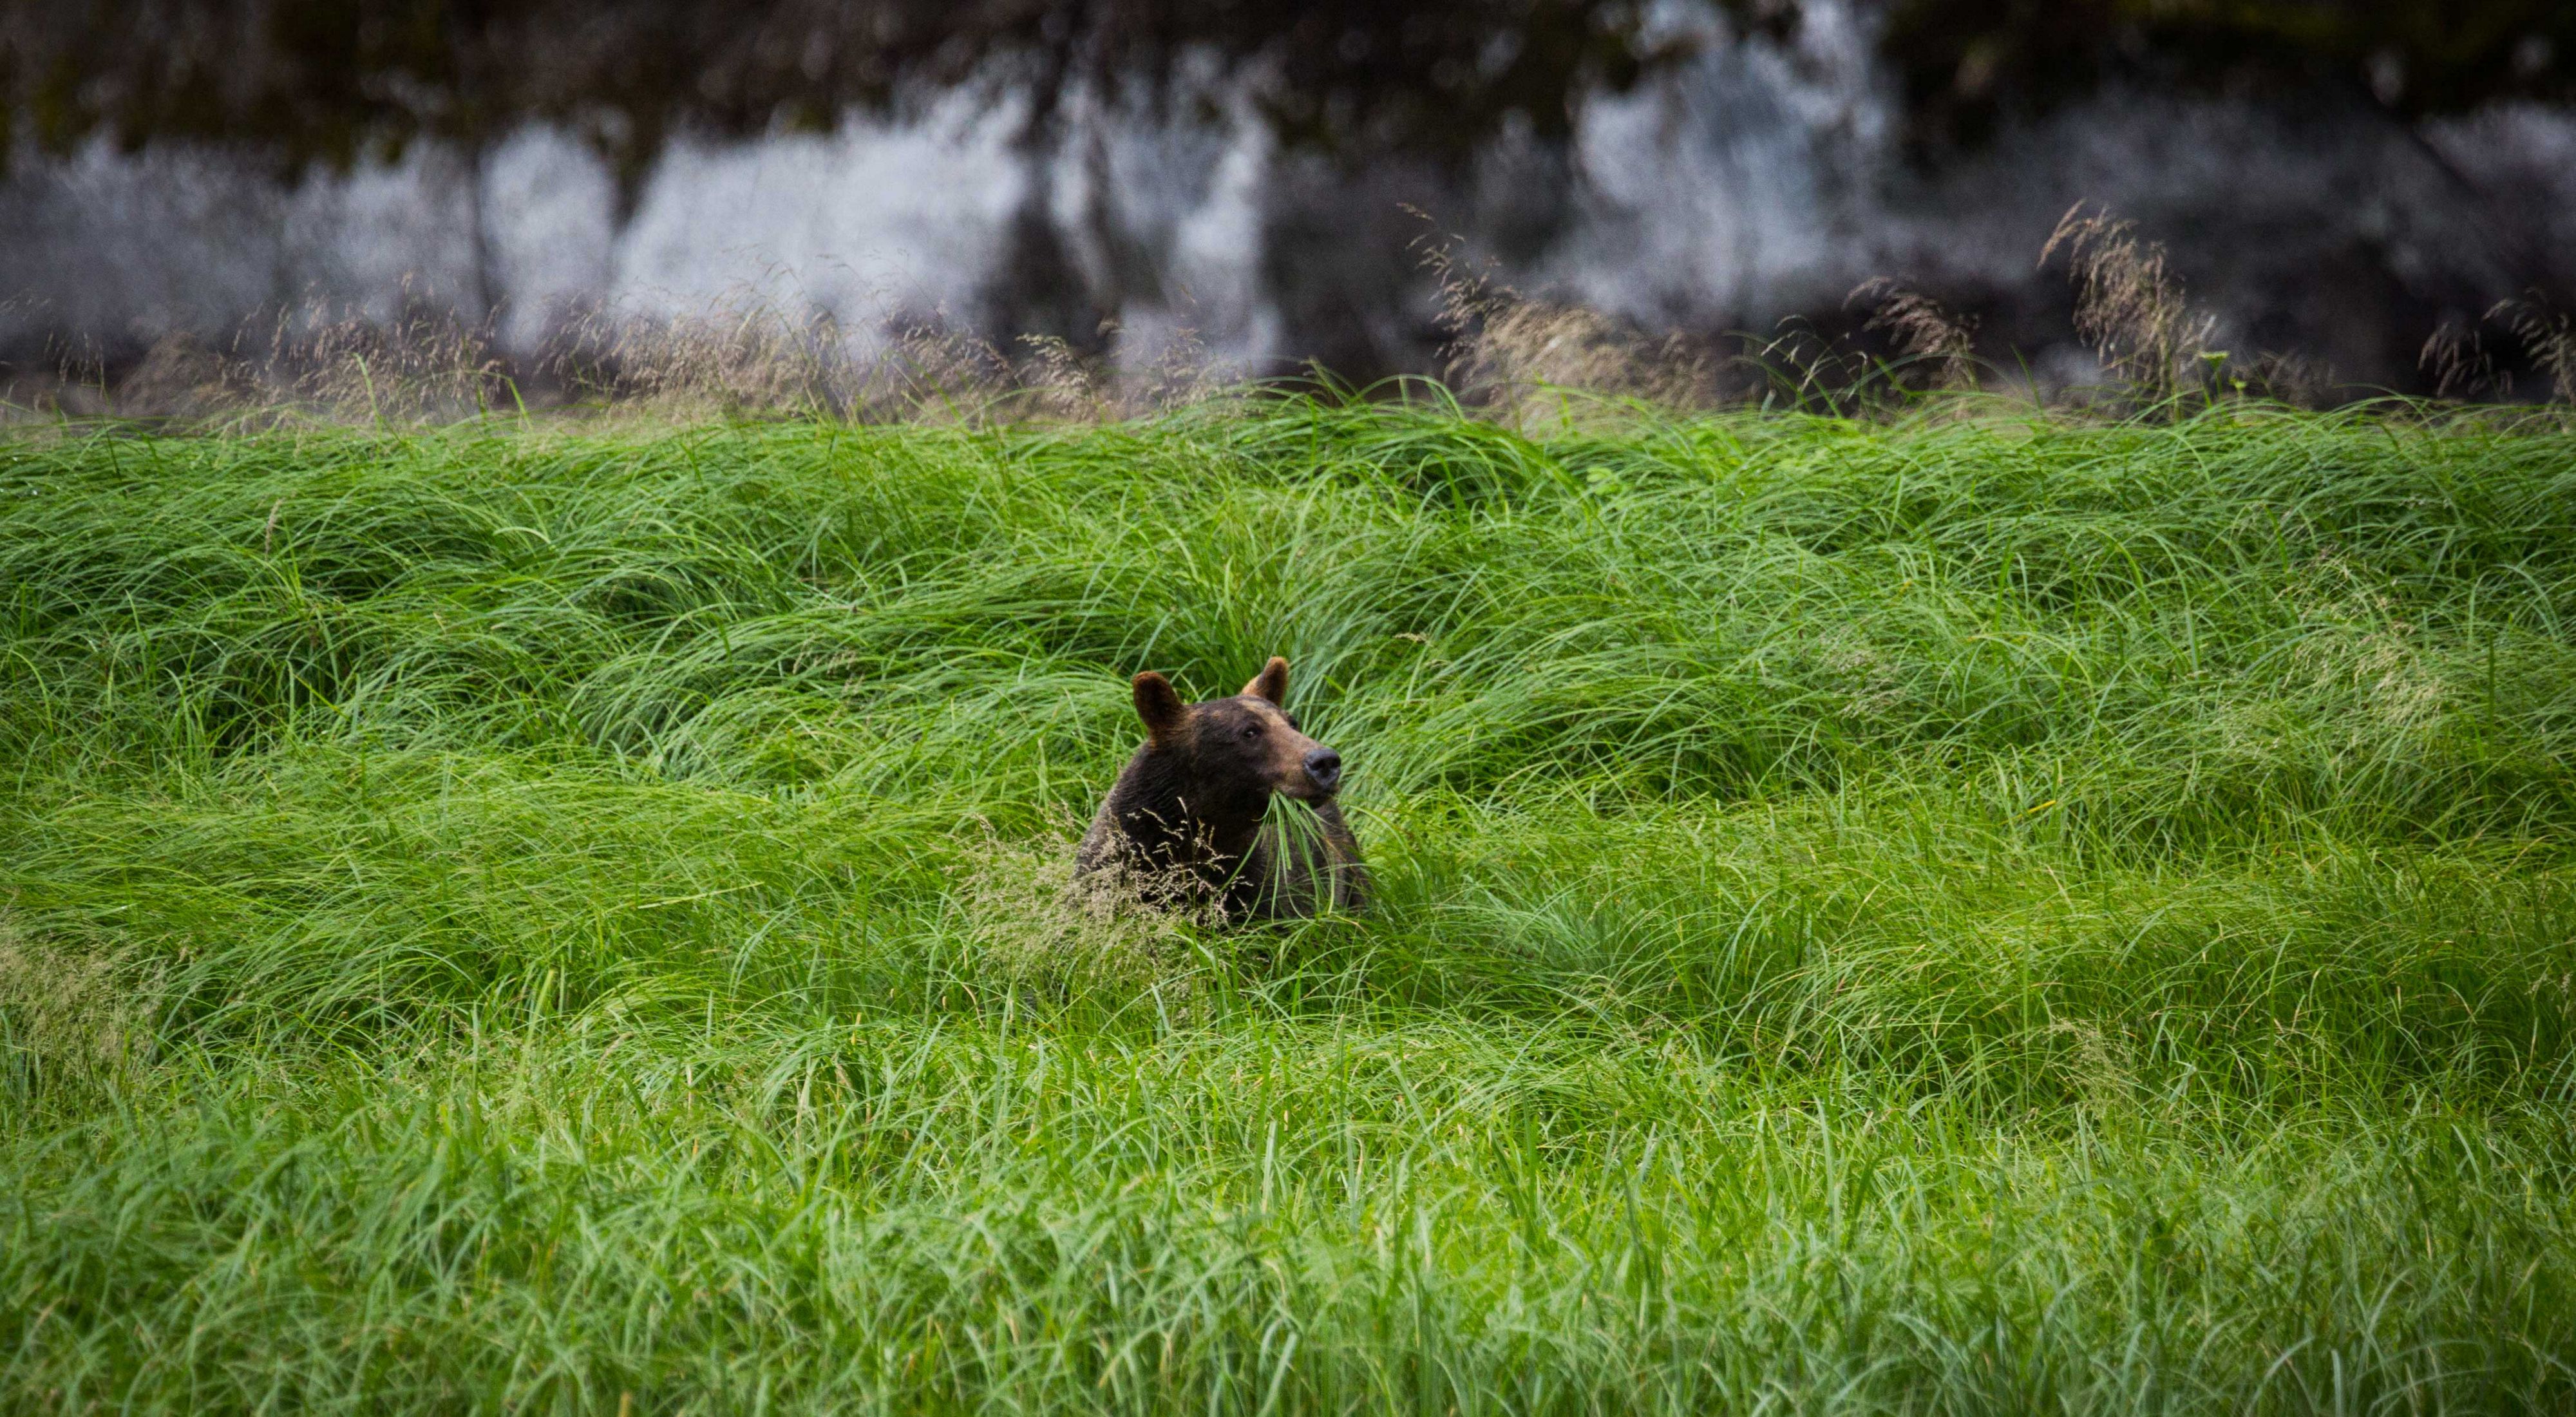 A grizzly eating grass in a field in Mussel Inlet in Great Bear Rainforest, BC.